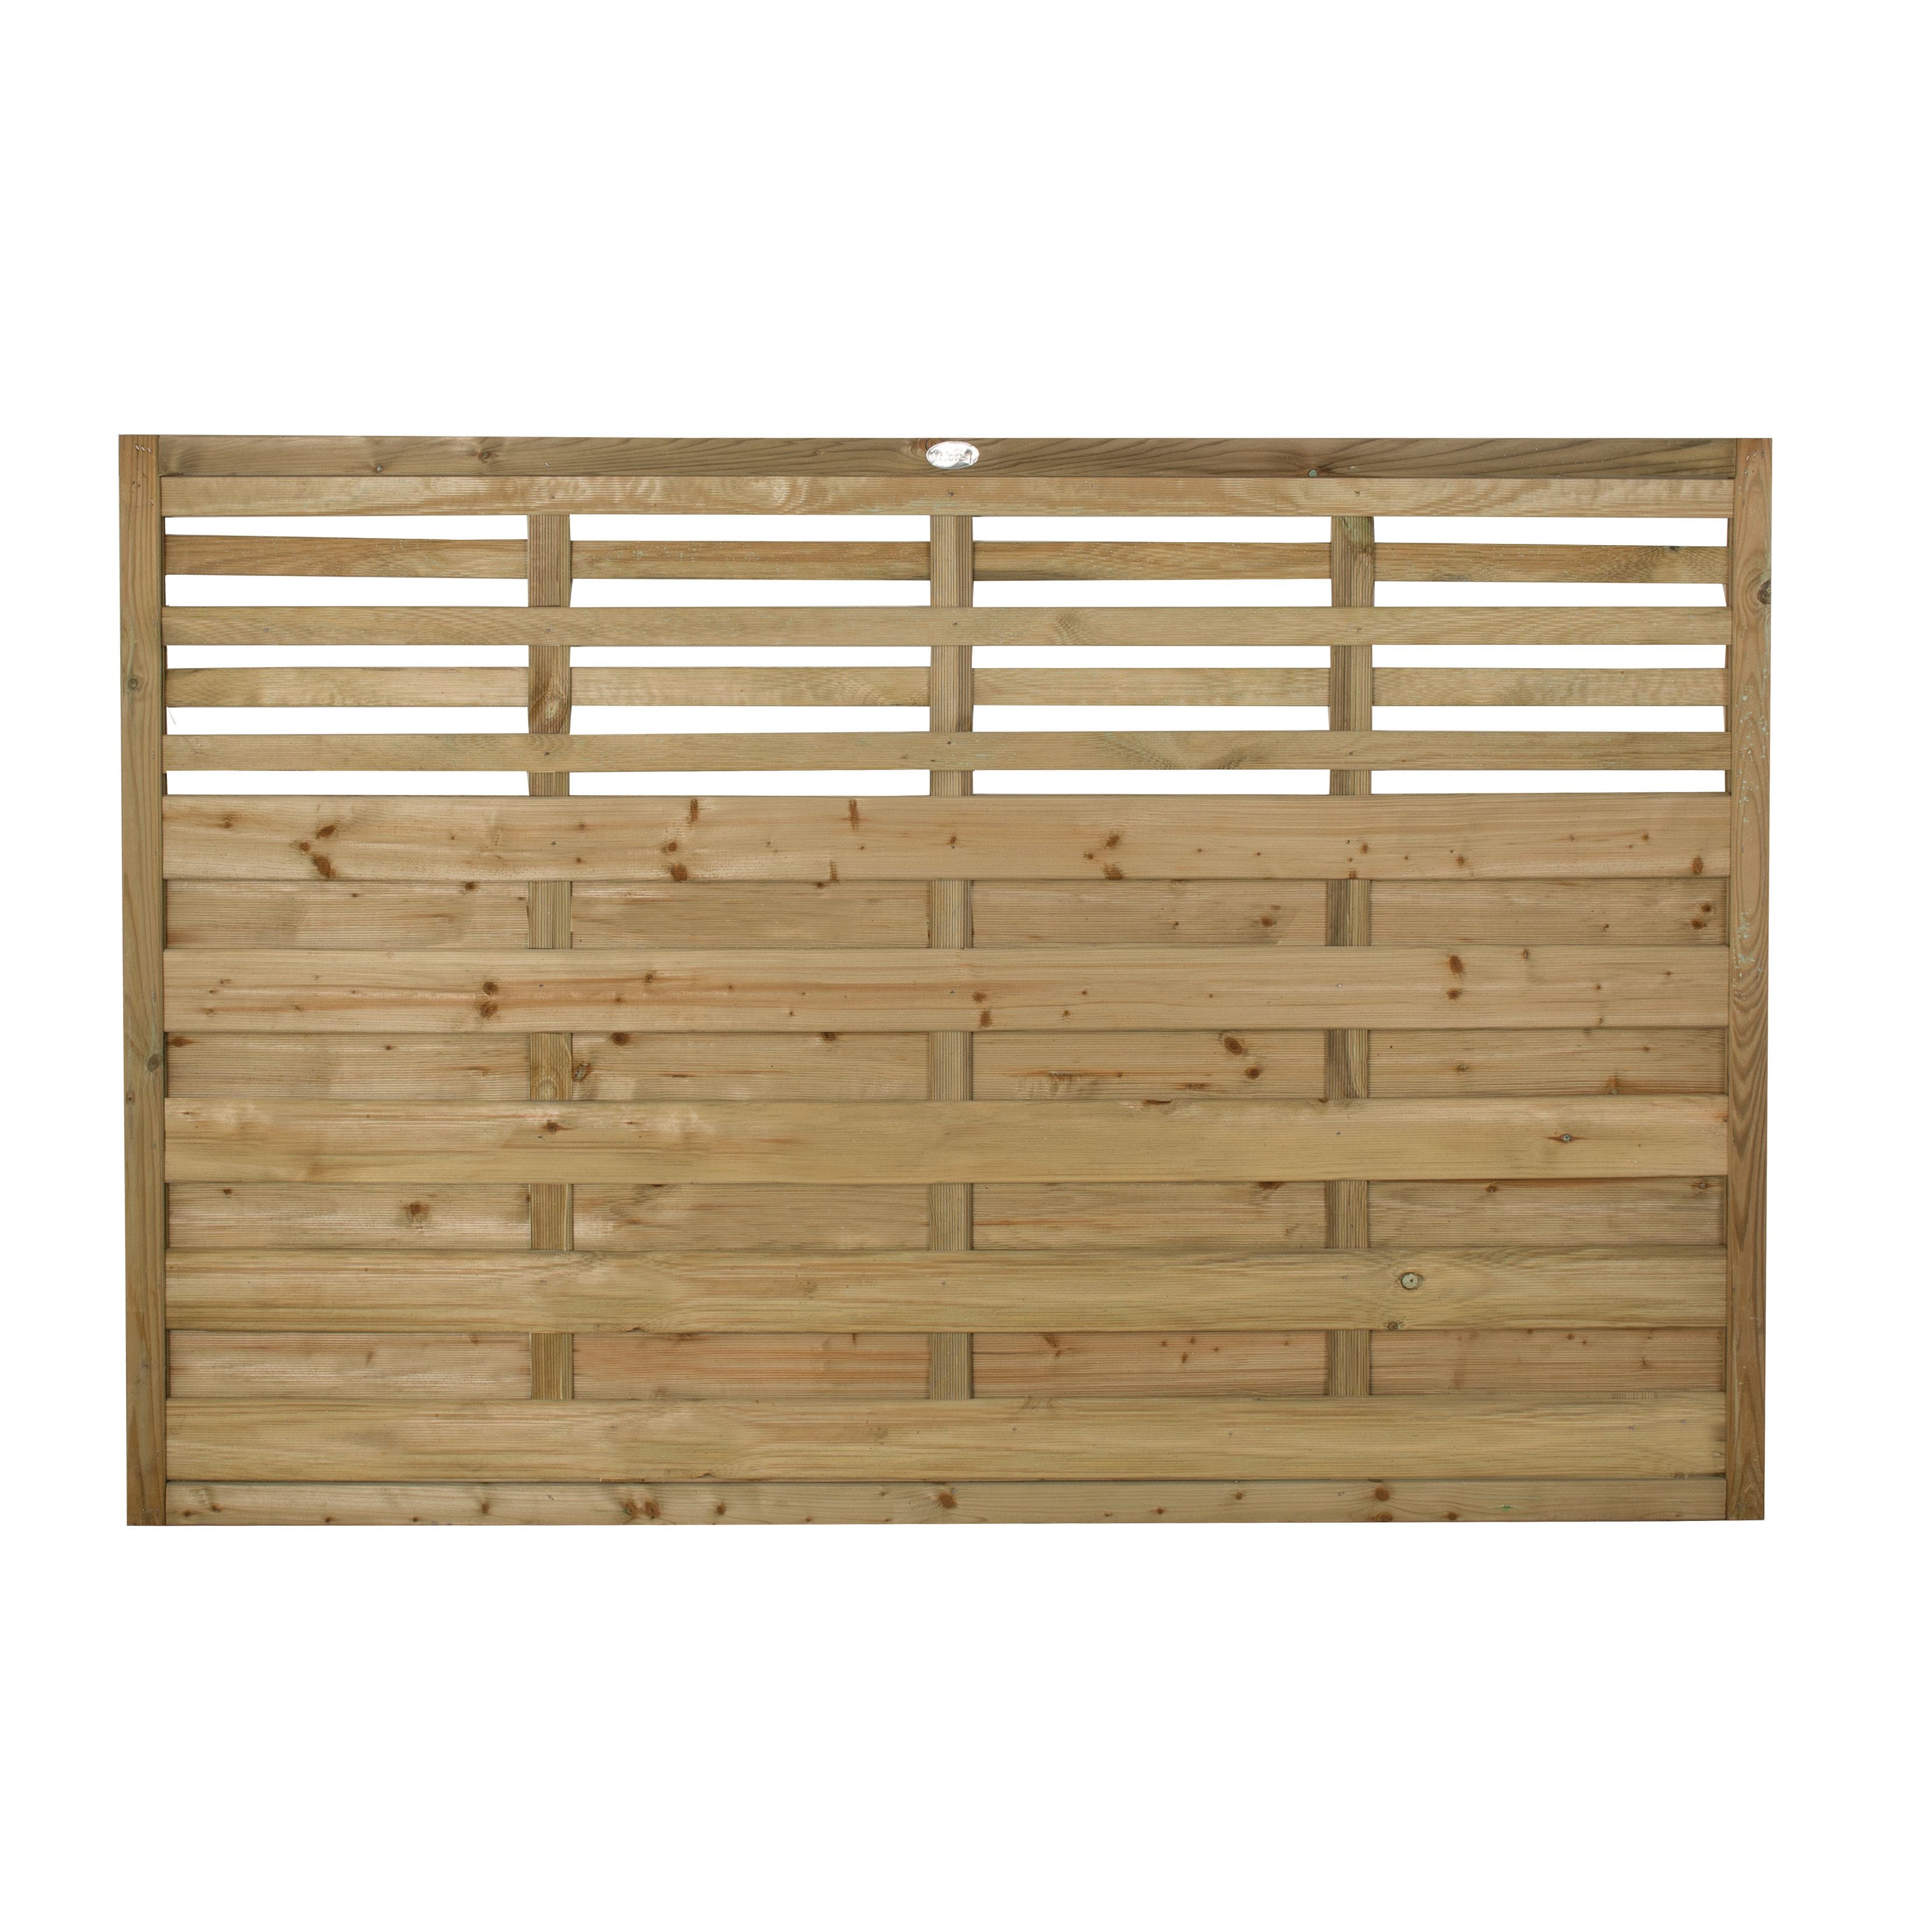 Image of Forest Garden Pressure Treated Kyoto Fence Panel - 1800 x 1200mm - 6 x 4ft - Pack of 4